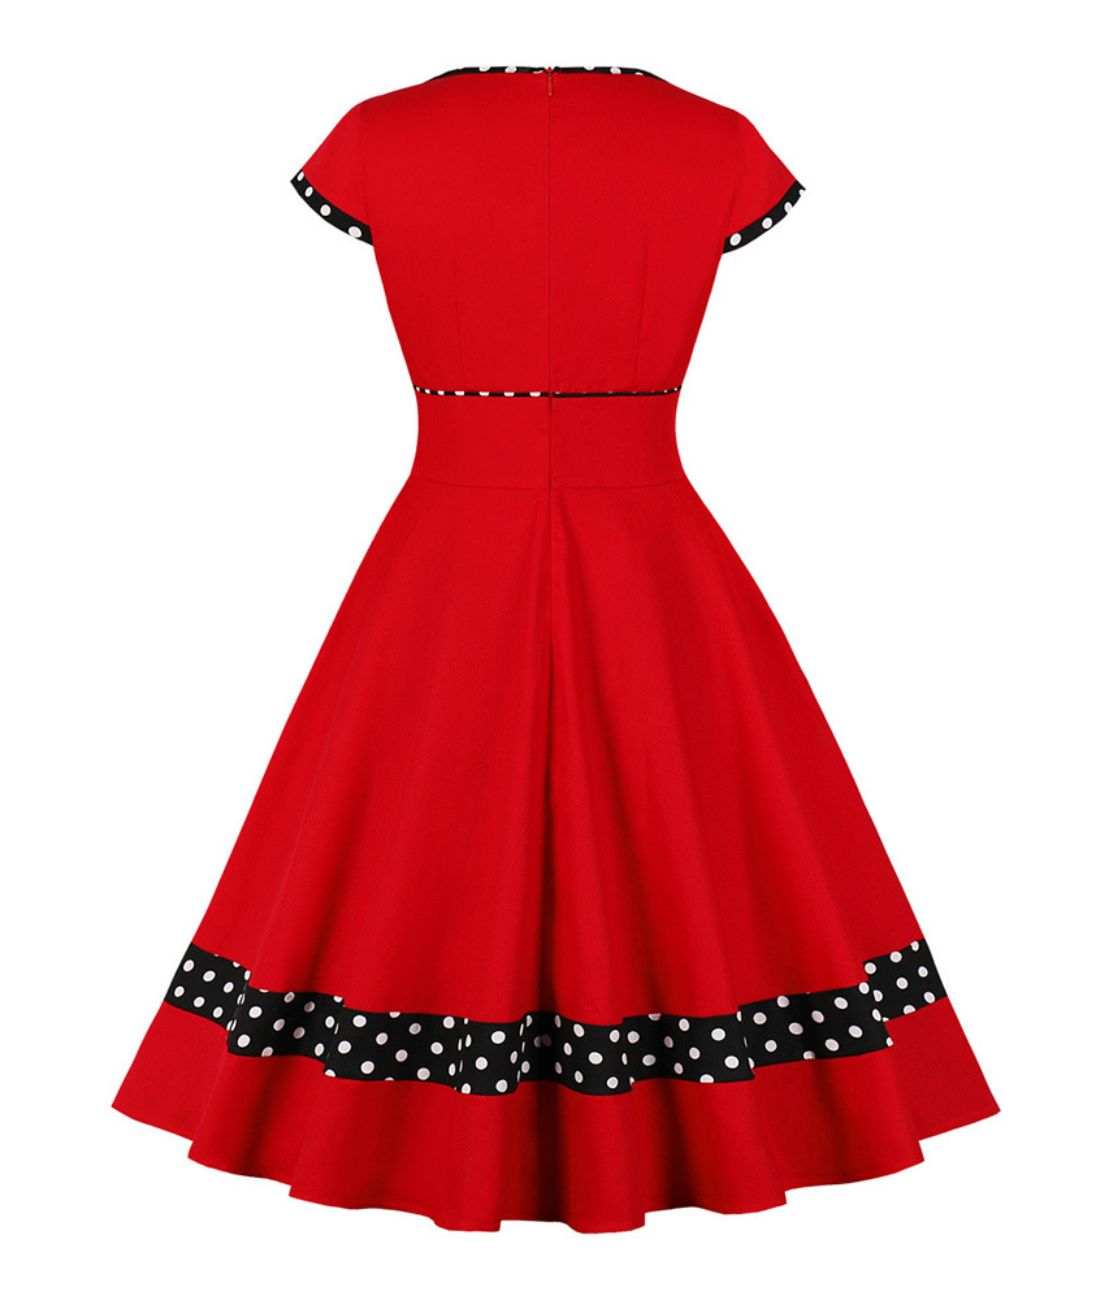 Robe Cocktail Style Année 50 - Madame Vintage